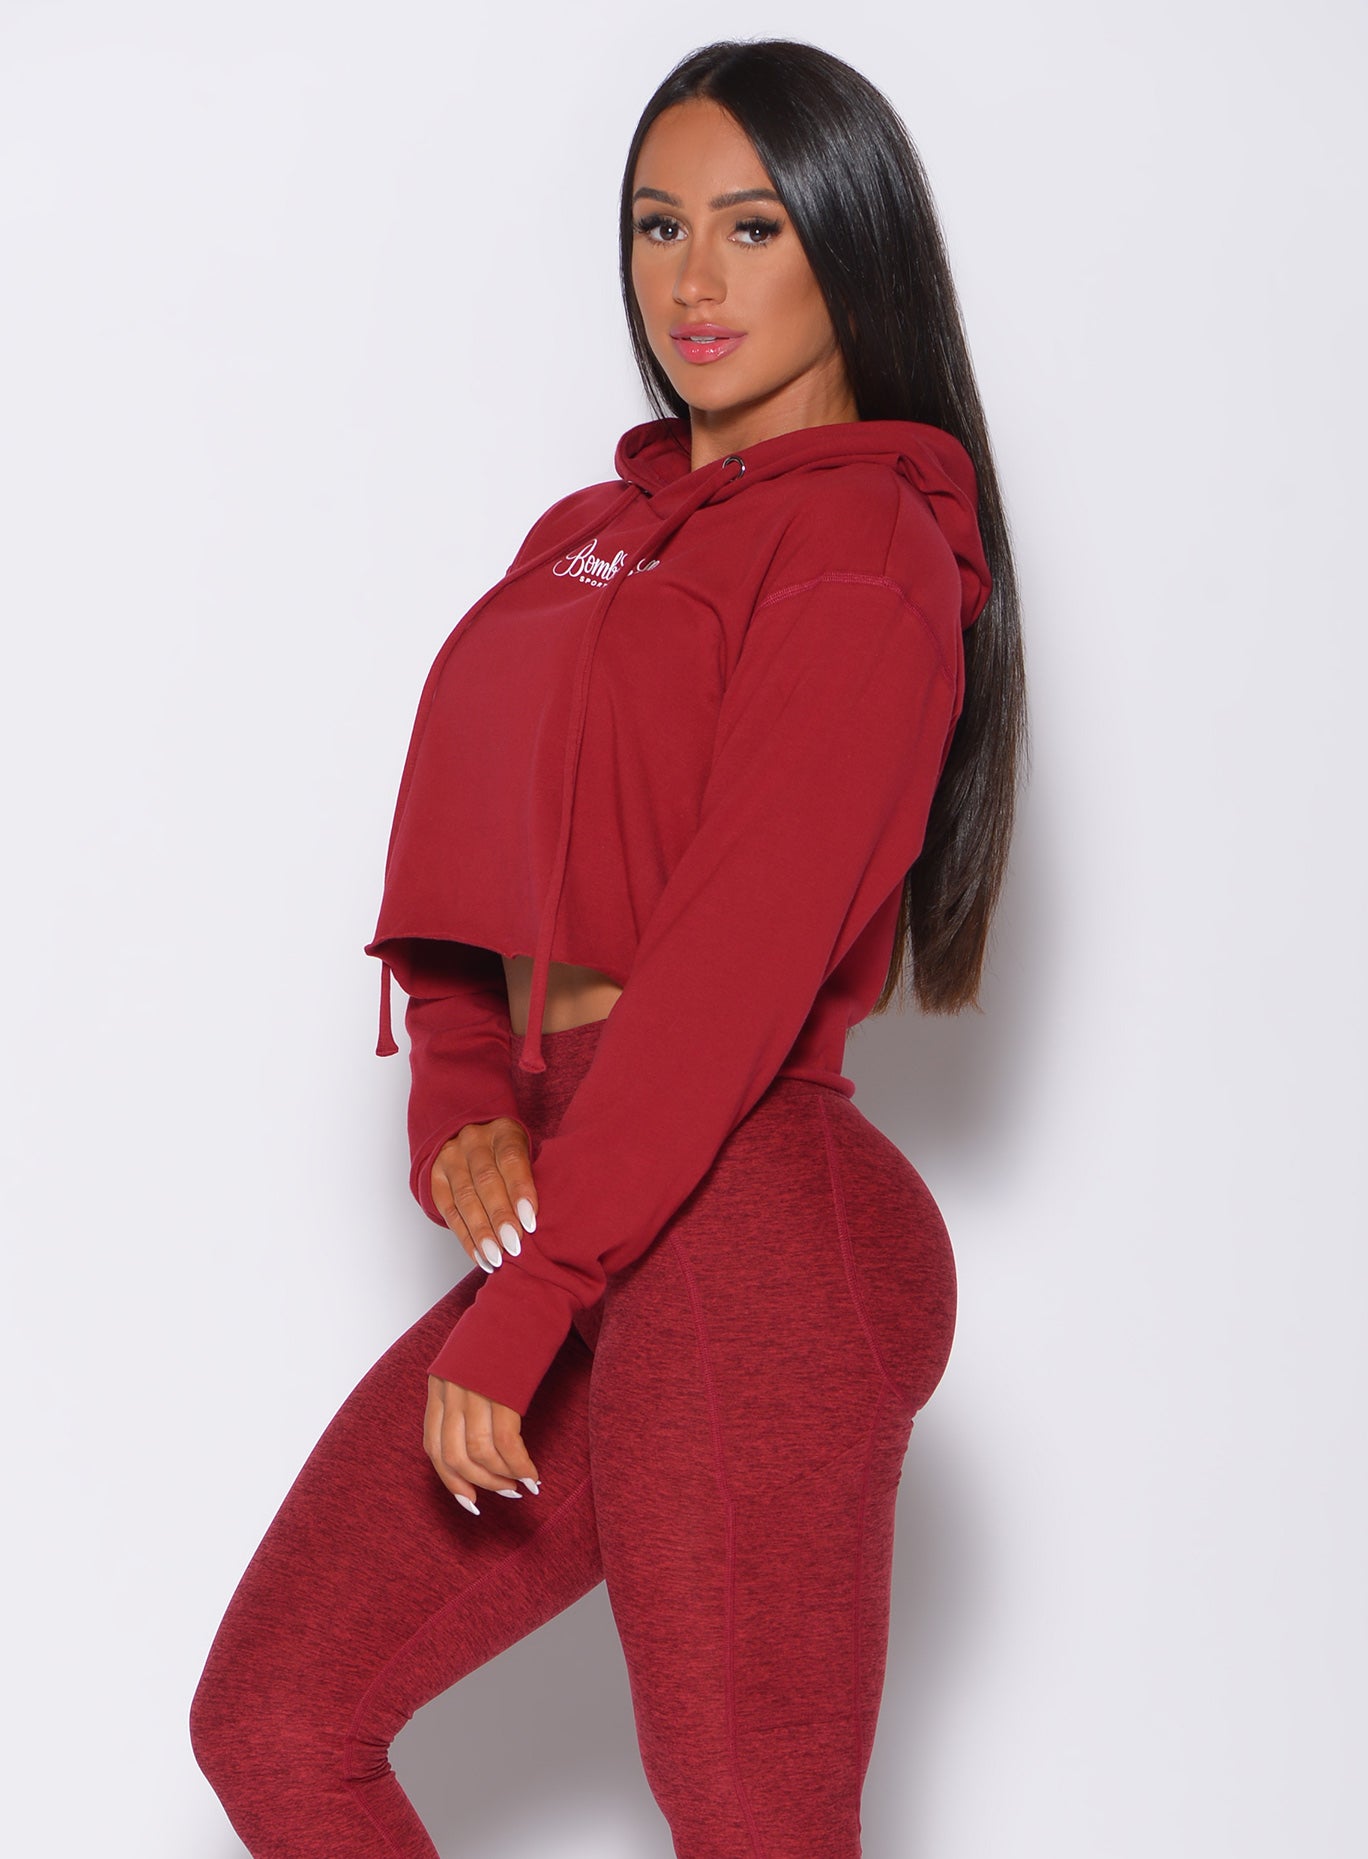 Left side profile view of a model angled left wearing our bombshell hoodie in red rose color and a matching leggings